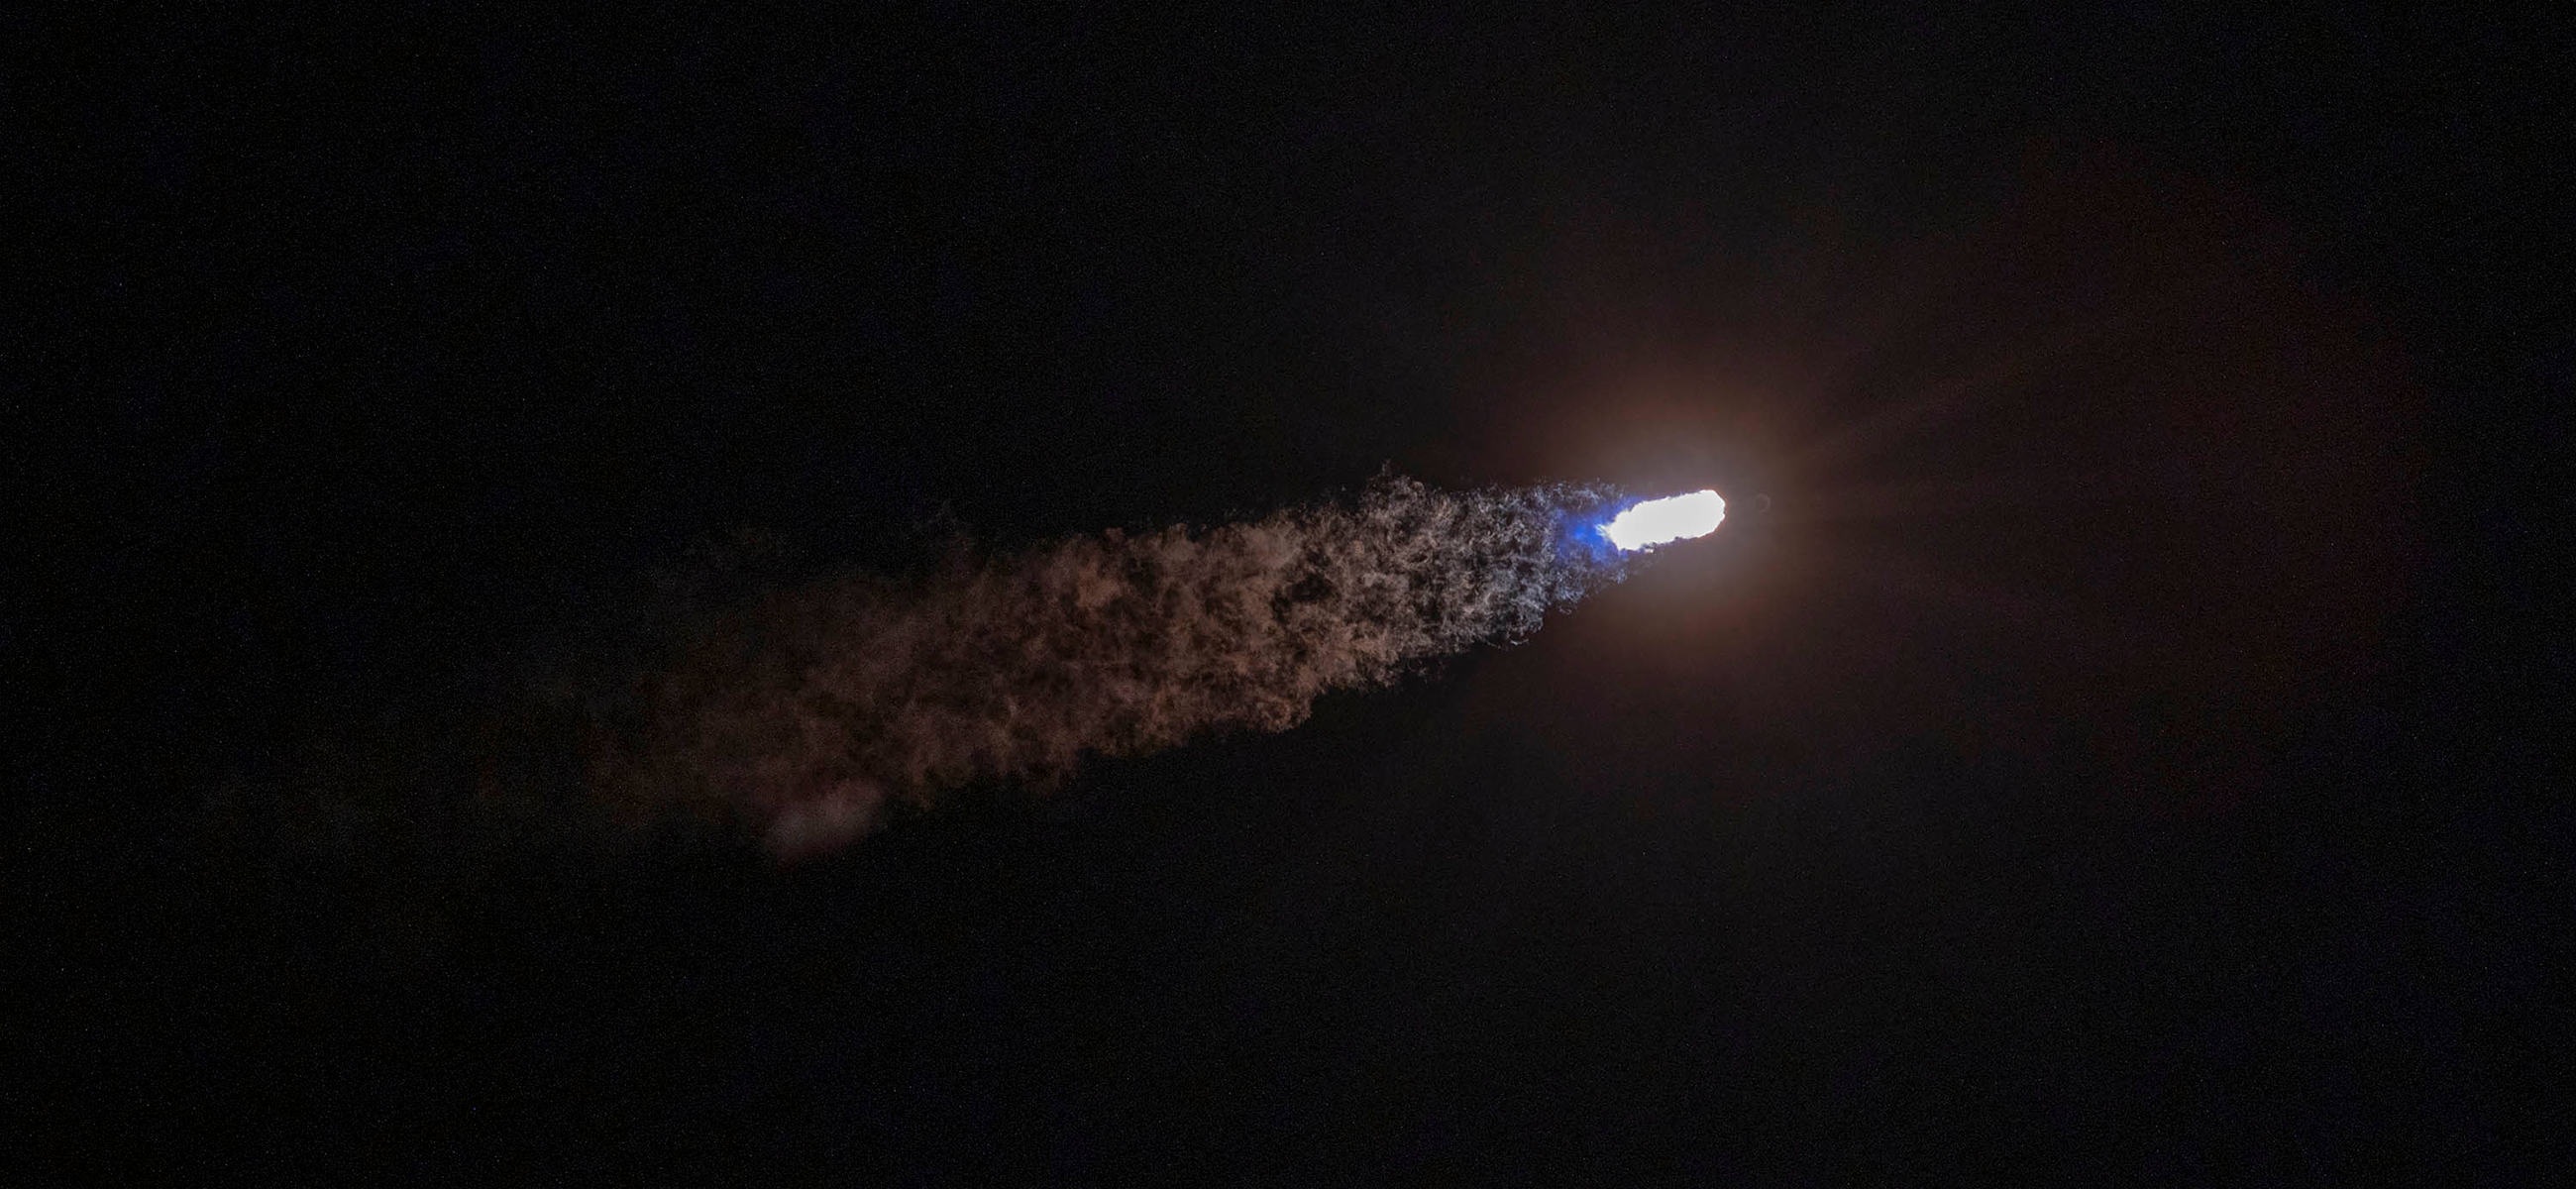 The launch of the Falcon 9 rocket with the Turksat 5B mission (Source: SpaceX)